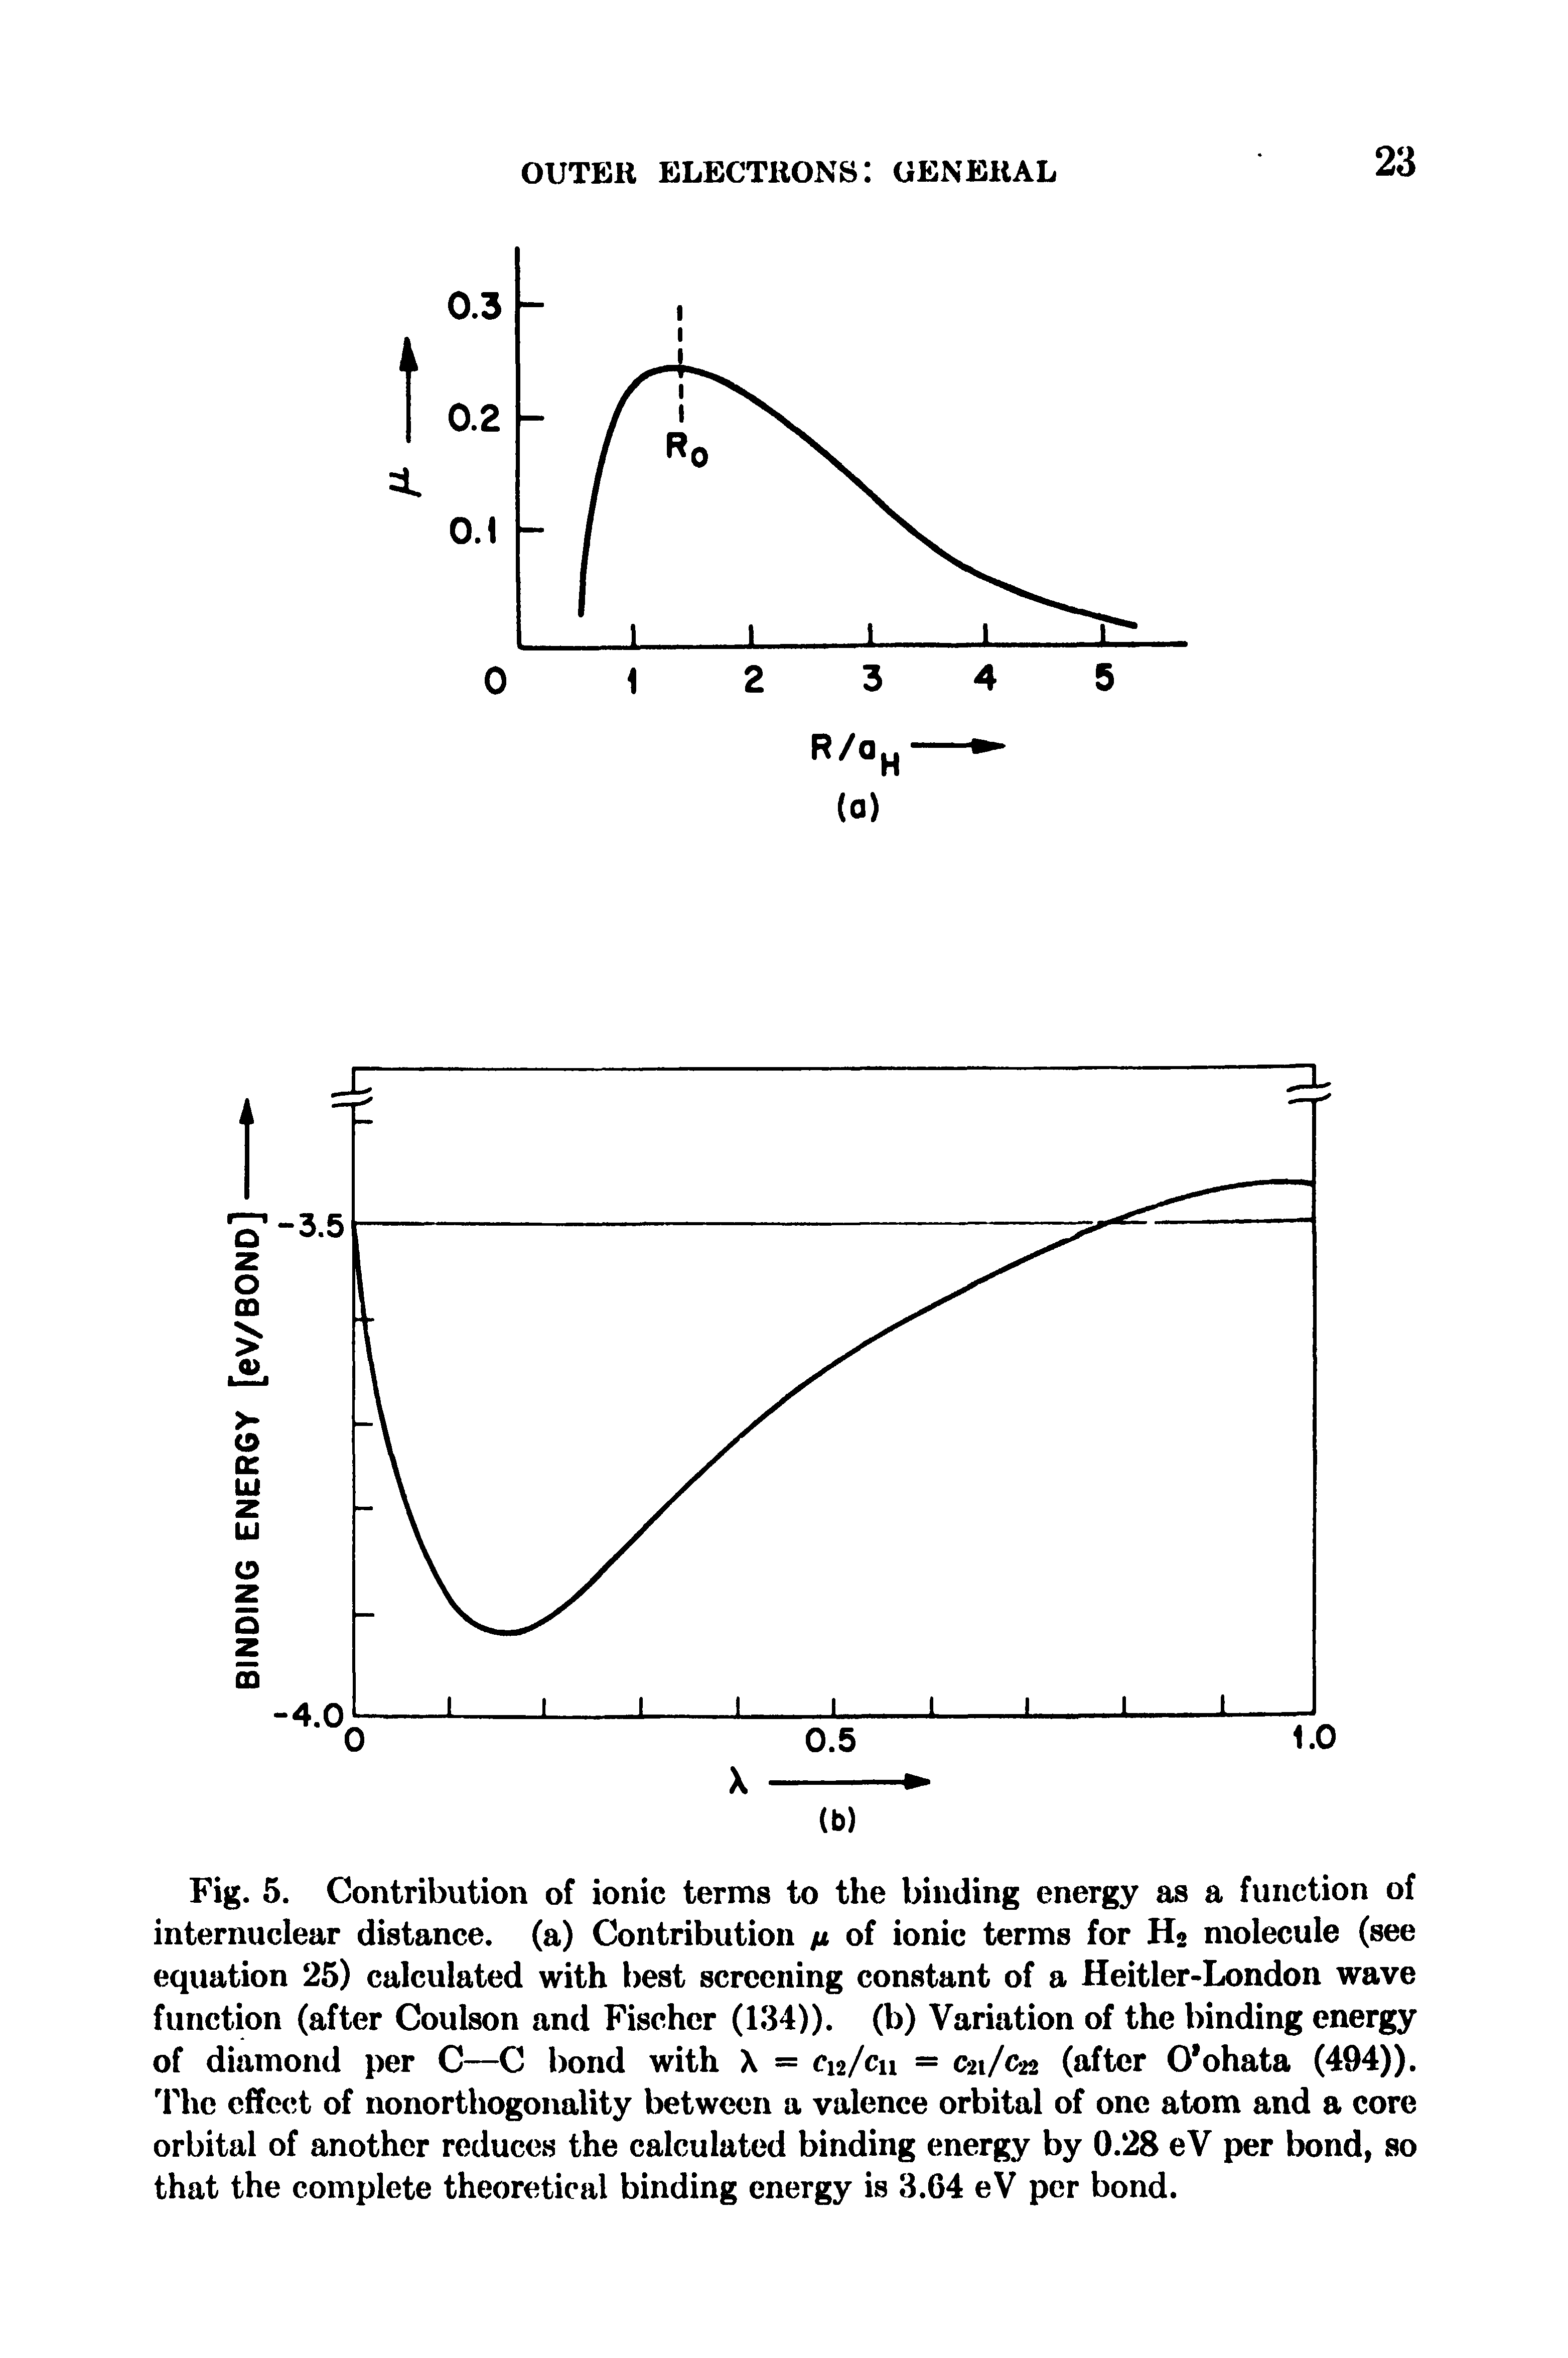 Fig. 5. Contribution of ionic terms to the binding energy as a function of internuclear distance, (a) Contribution /i of ionic terms for H2 molecule (see equation 25) calculated with best screening constant of a Heitler-London wave function (after Coulson and Fischer (134)). (b) Variation of the binding energy...